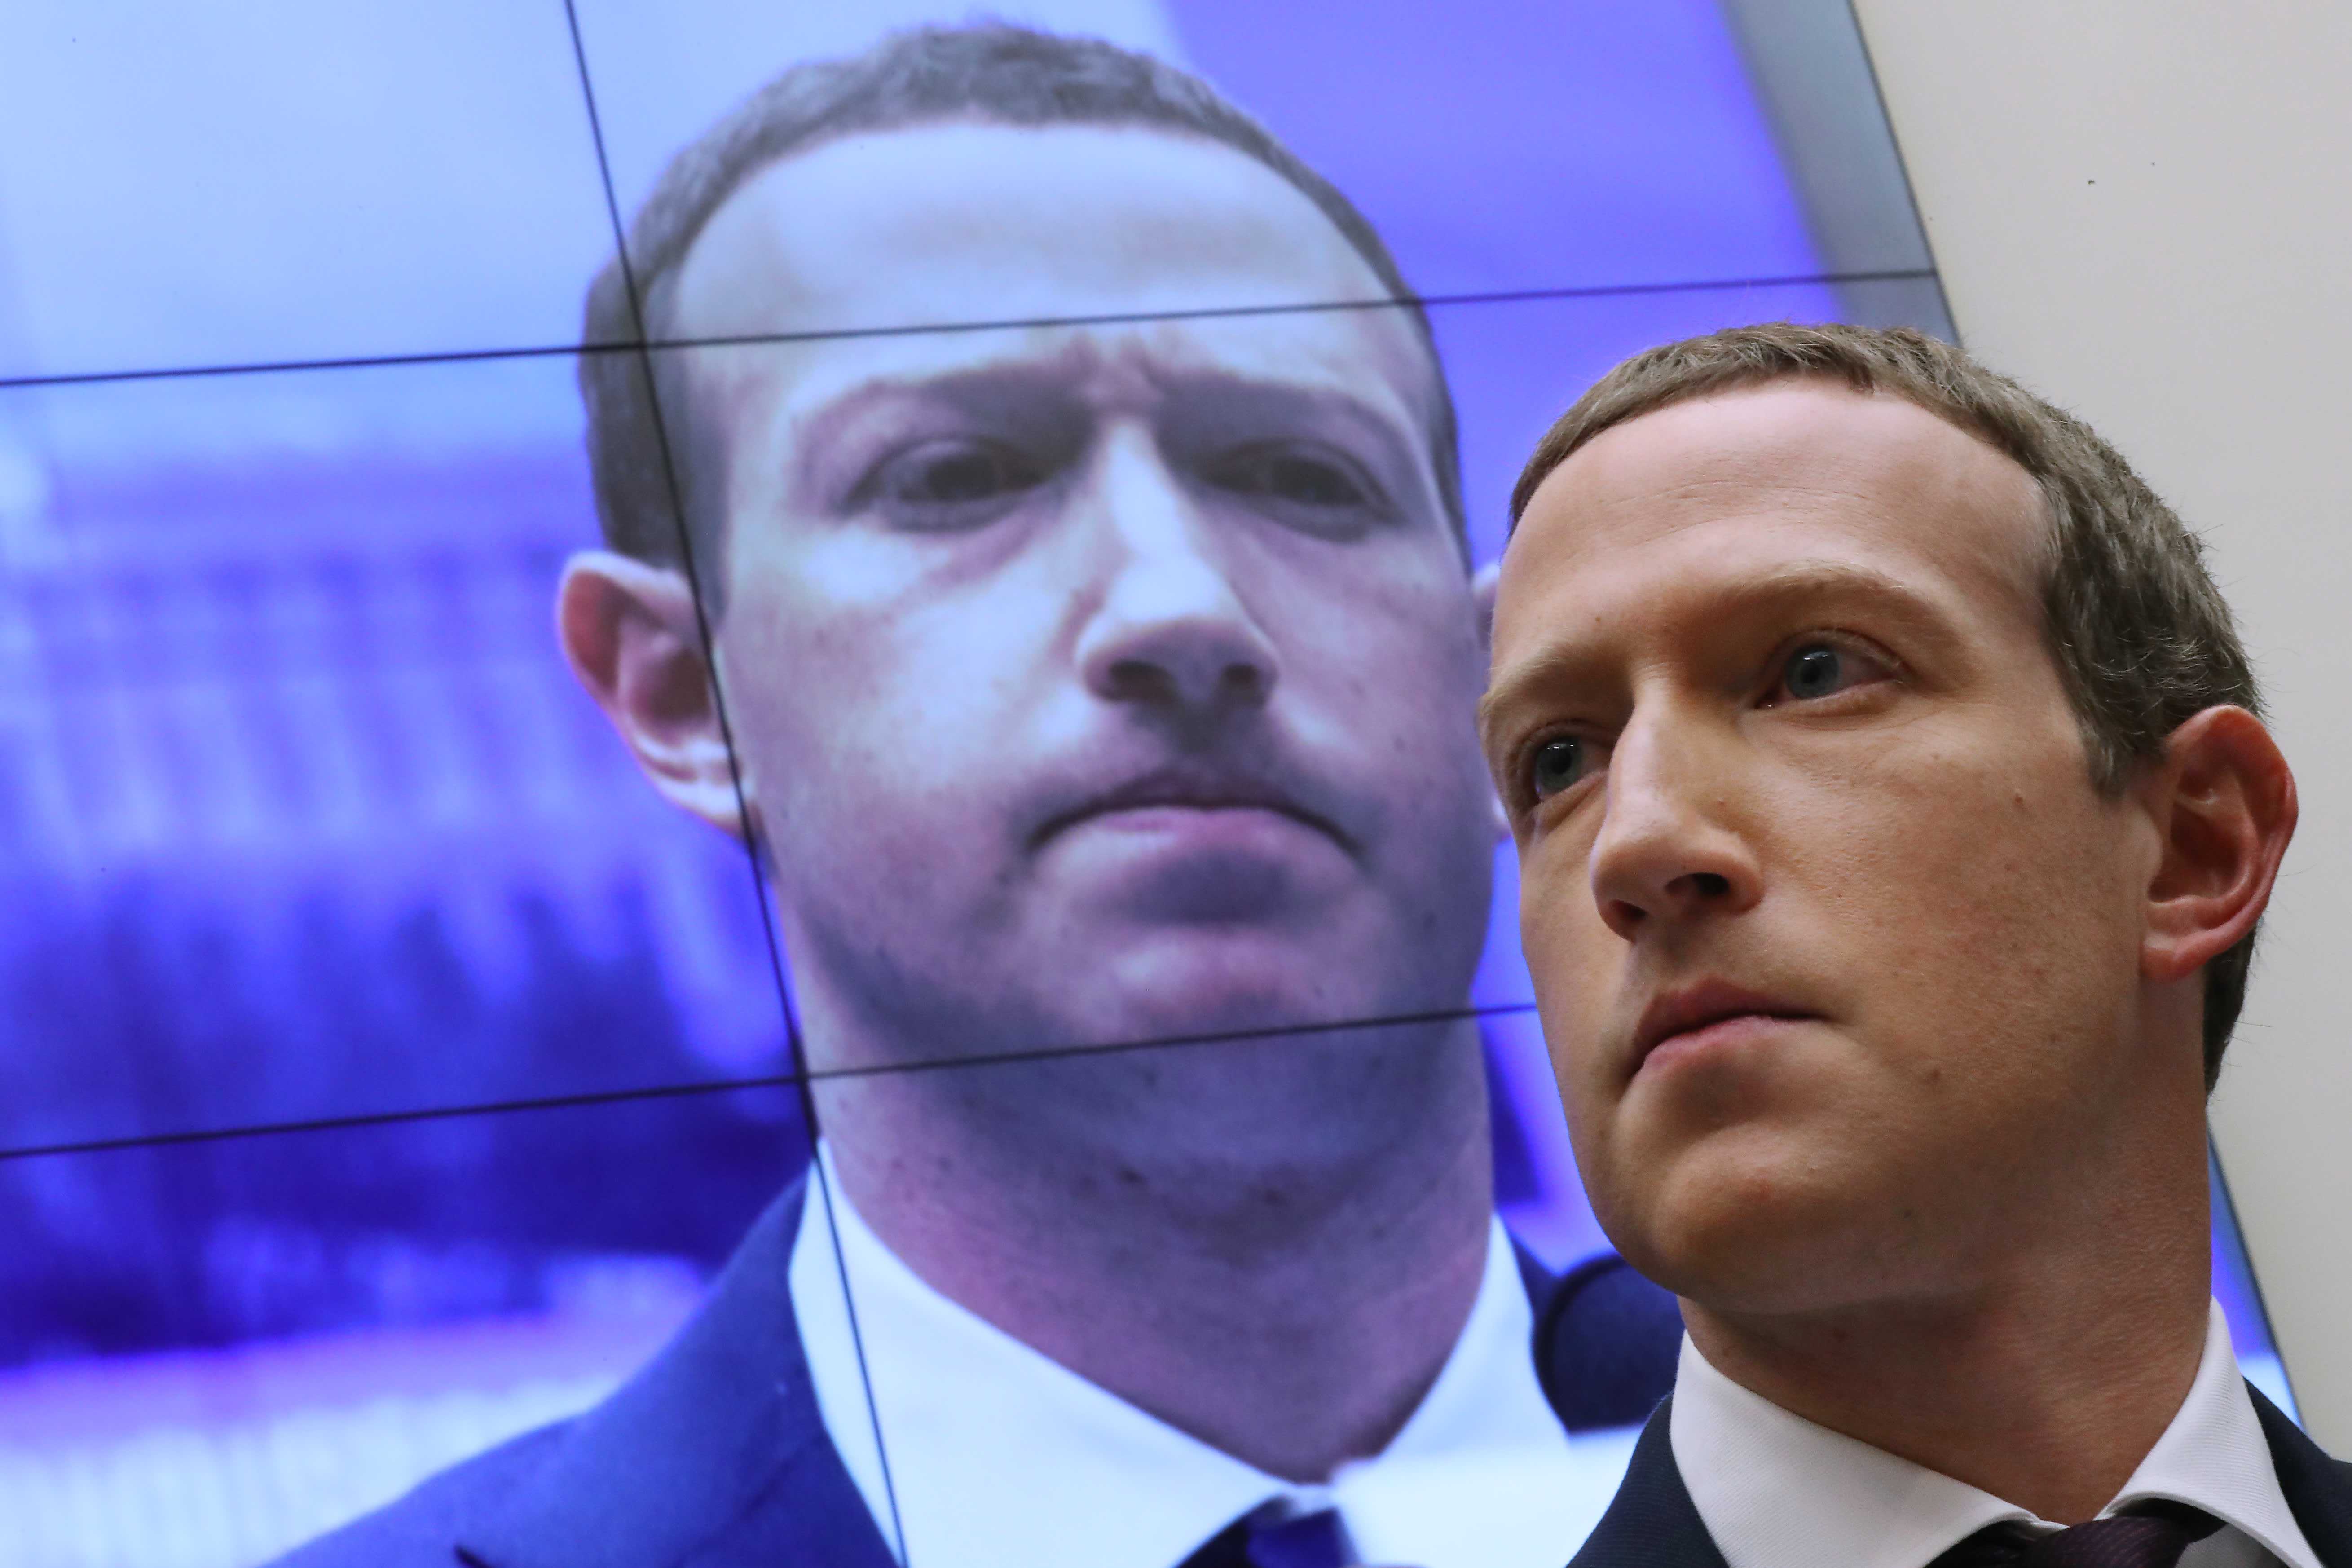 Facebook whistleblower releases documents to multiple news outlets showing company knows the harm it causes – CNBC